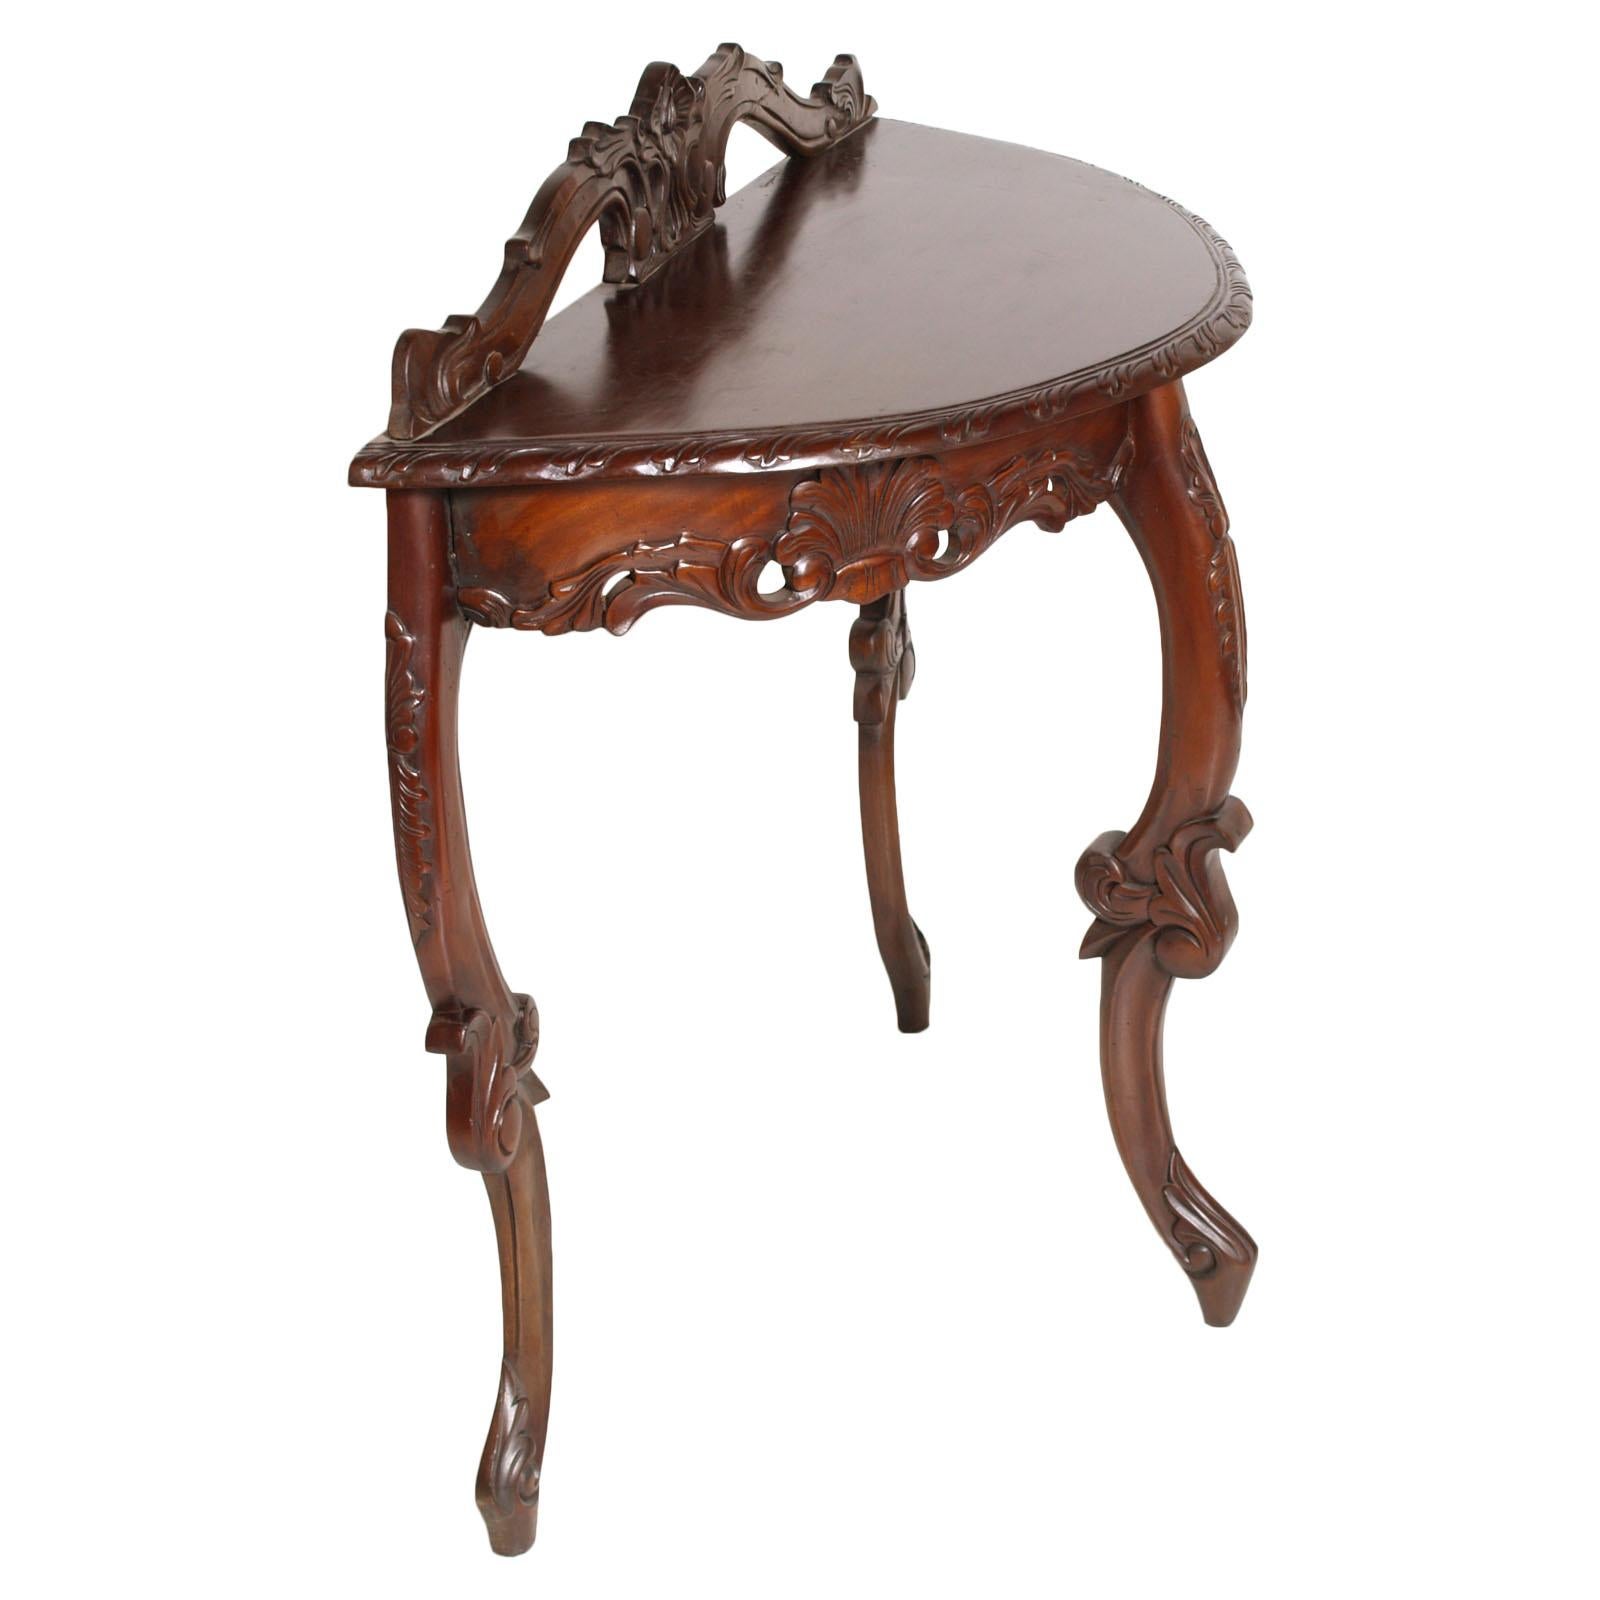 Italian Venetian Liberty console, demilune table, Eugenio Quarti designer attributable in hand carved solid mahogany, restored and wax-polished, circa 1900s. From Hungaria Palace Hotel -Lido di Venezia

Measures cm: H 88, W 90, D 42


About Eugenio